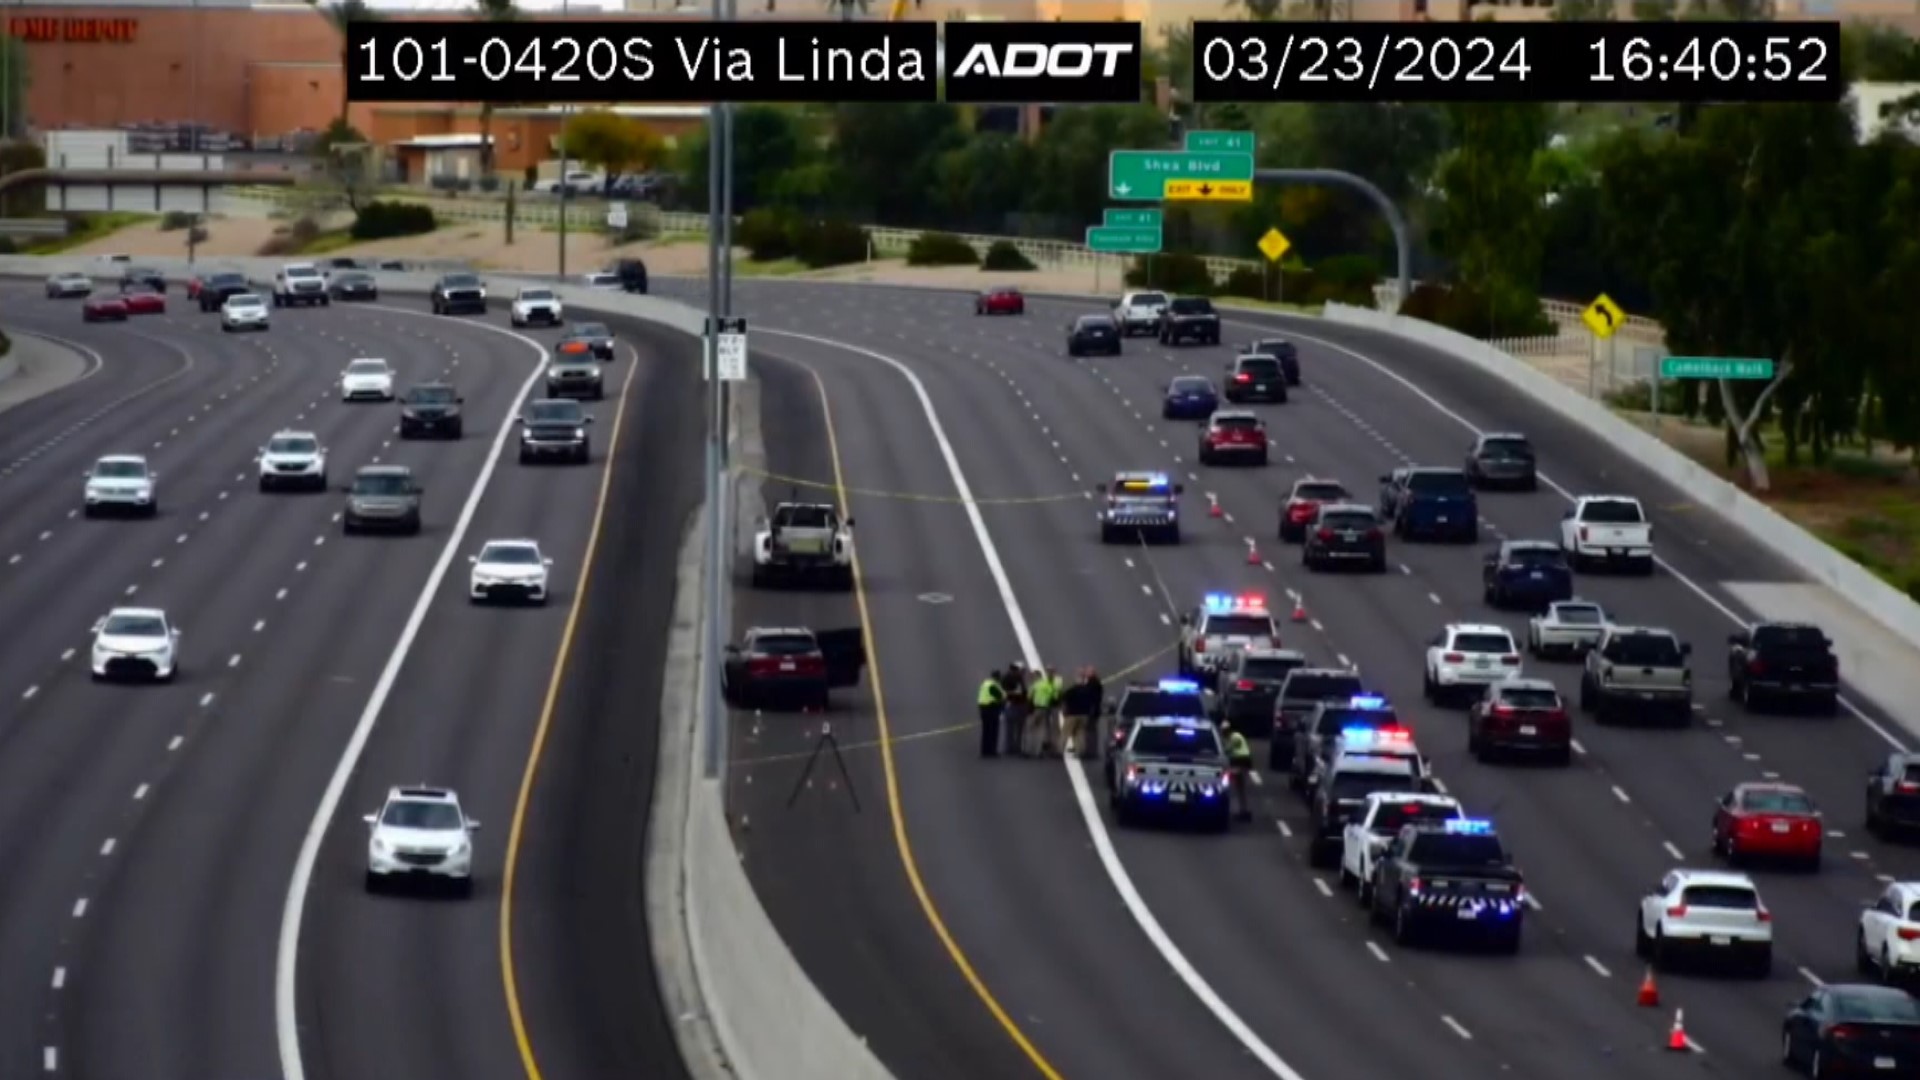 Two drivers crashed into each other during a road rage incident on the Loop 101 in Scottsdale. One of them then opened fire. Watch the video above for more.